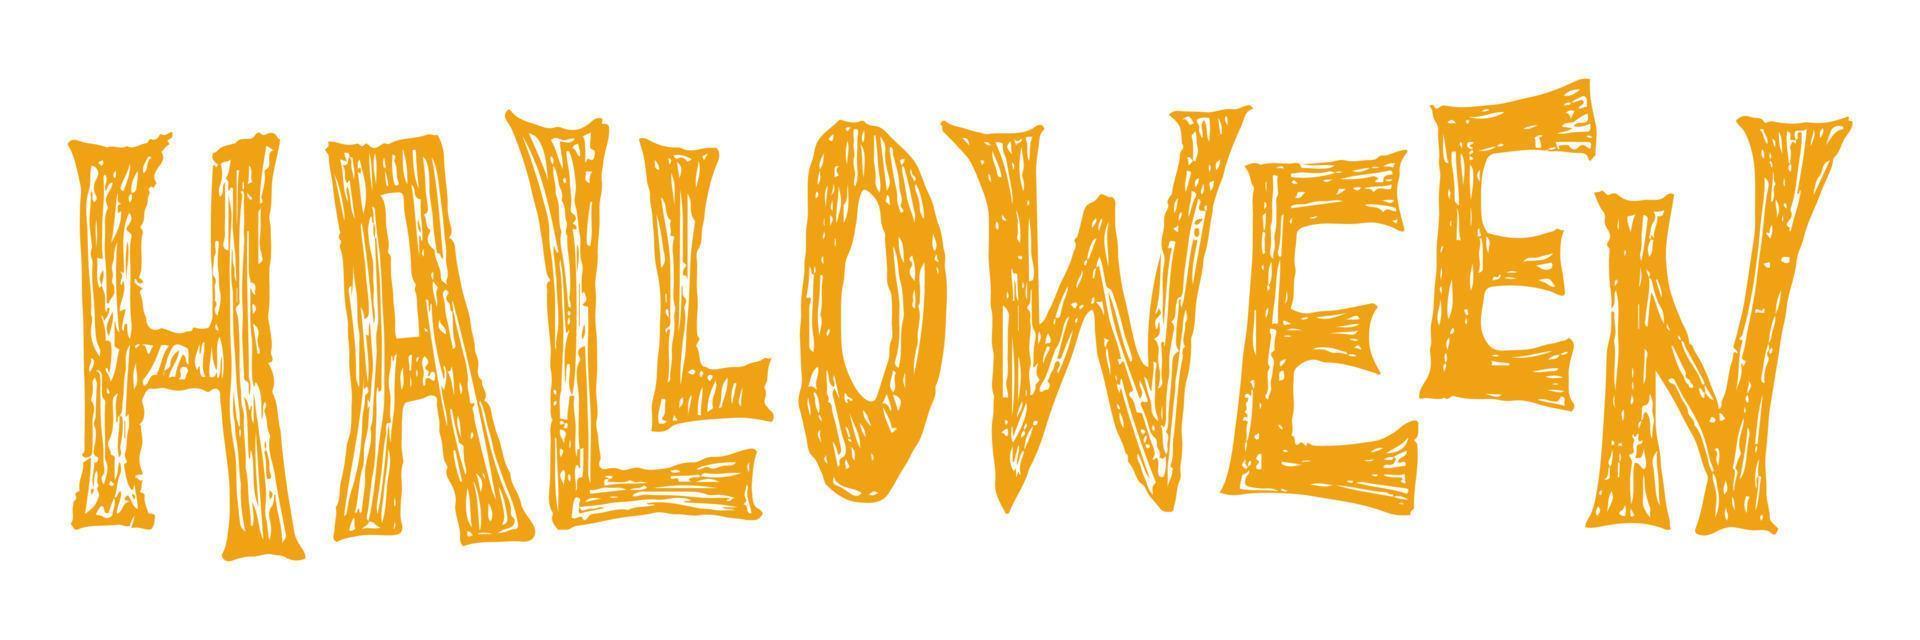 Halloween hand drawn lettering. Handwritten text for Halloween Holiday. vector